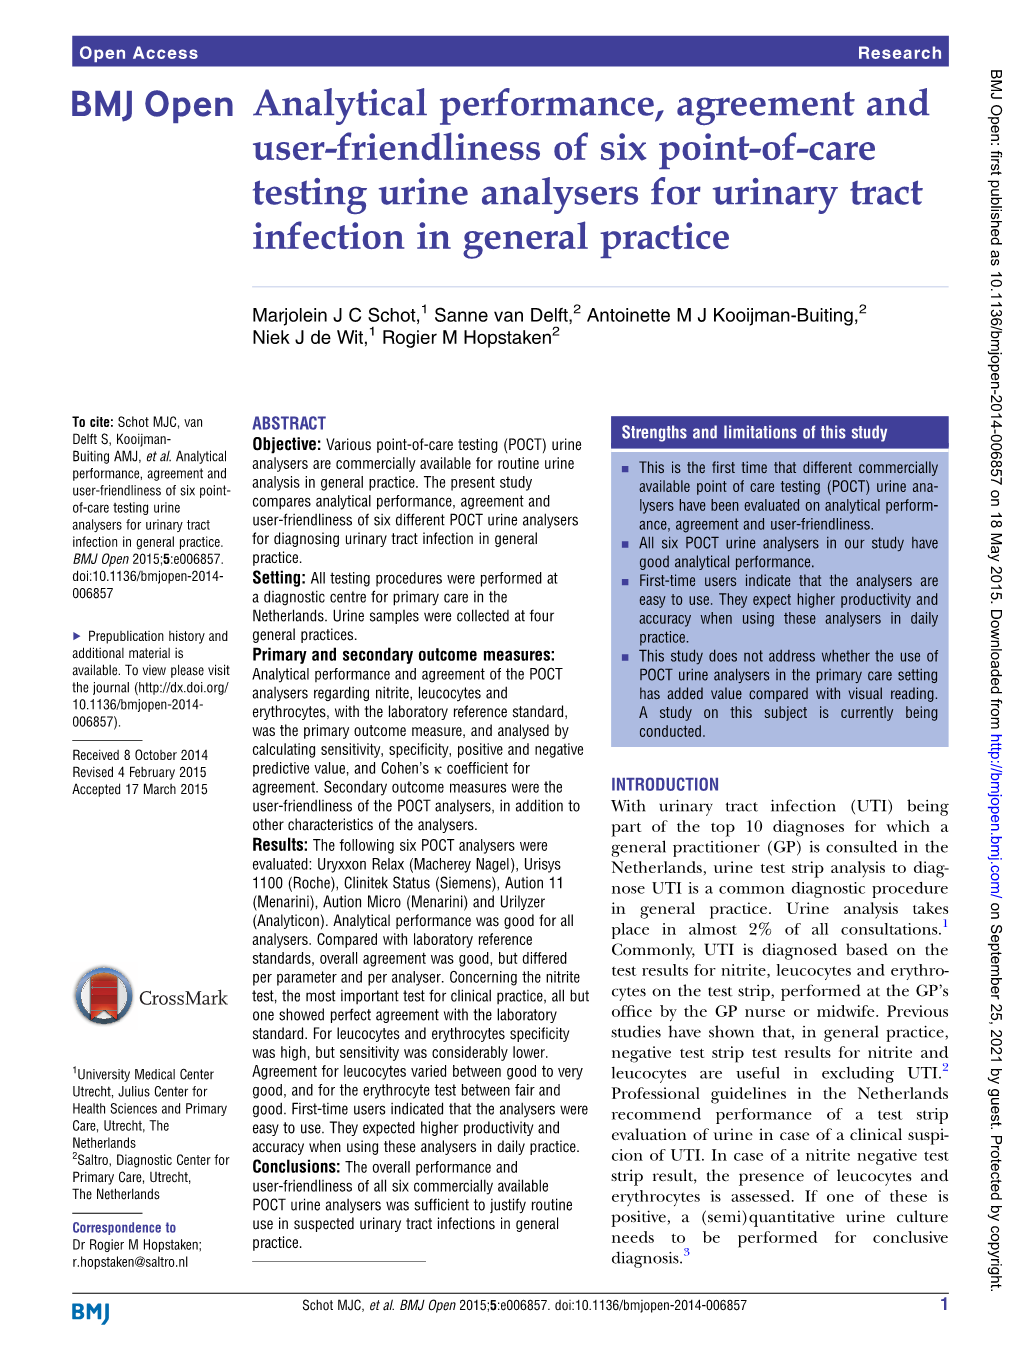 Analytical Performance, Agreement and User-Friendliness of Six Point-Of-Care Testing Urine Analysers for Urinary Tract Infection in General Practice